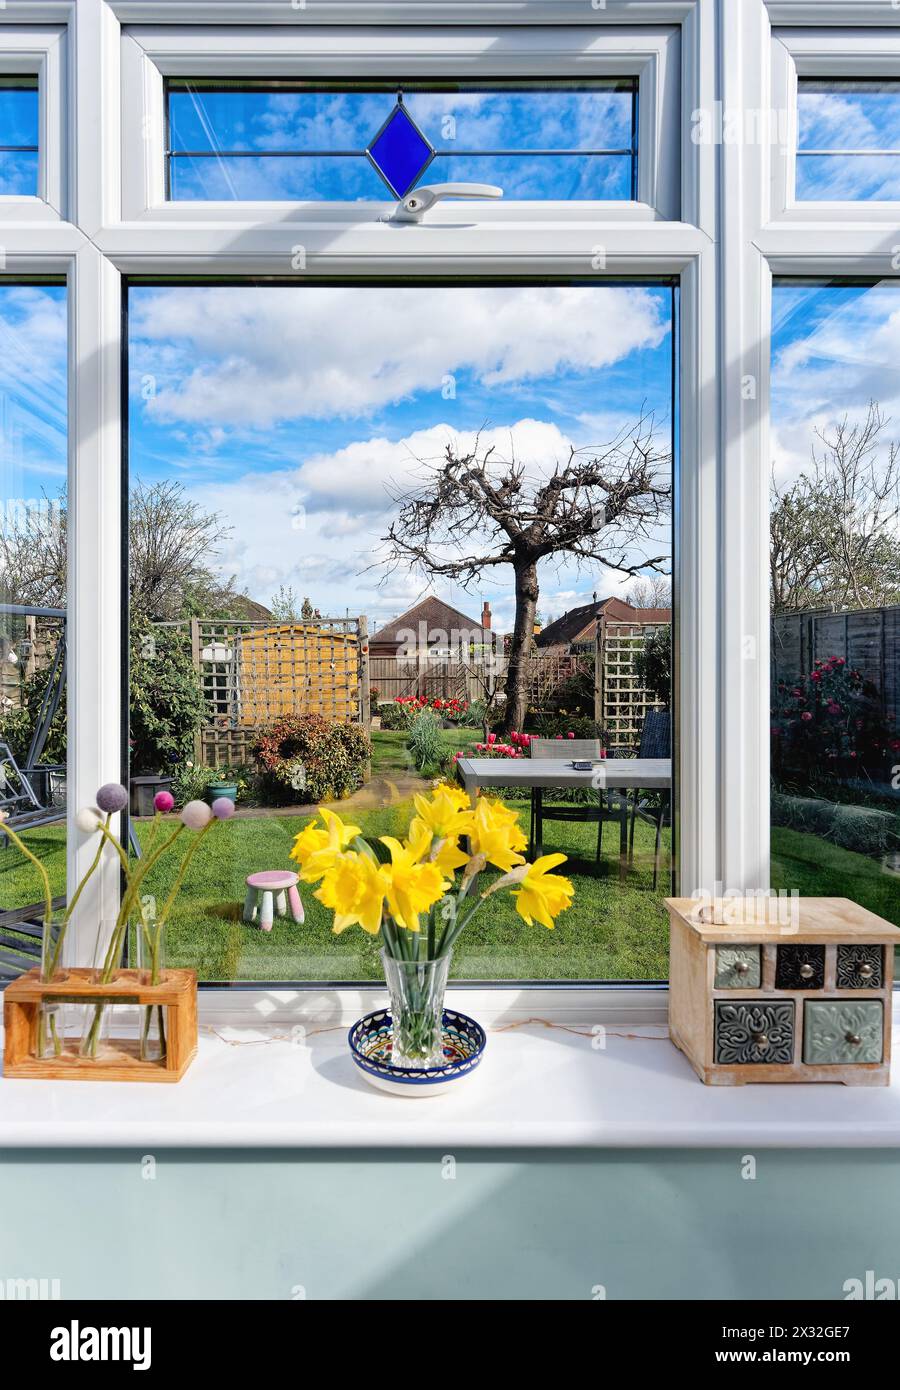 A view of a private garden as seen through the windows of a conservatory on a sunny spring day, Shepperton England UK Stock Photo